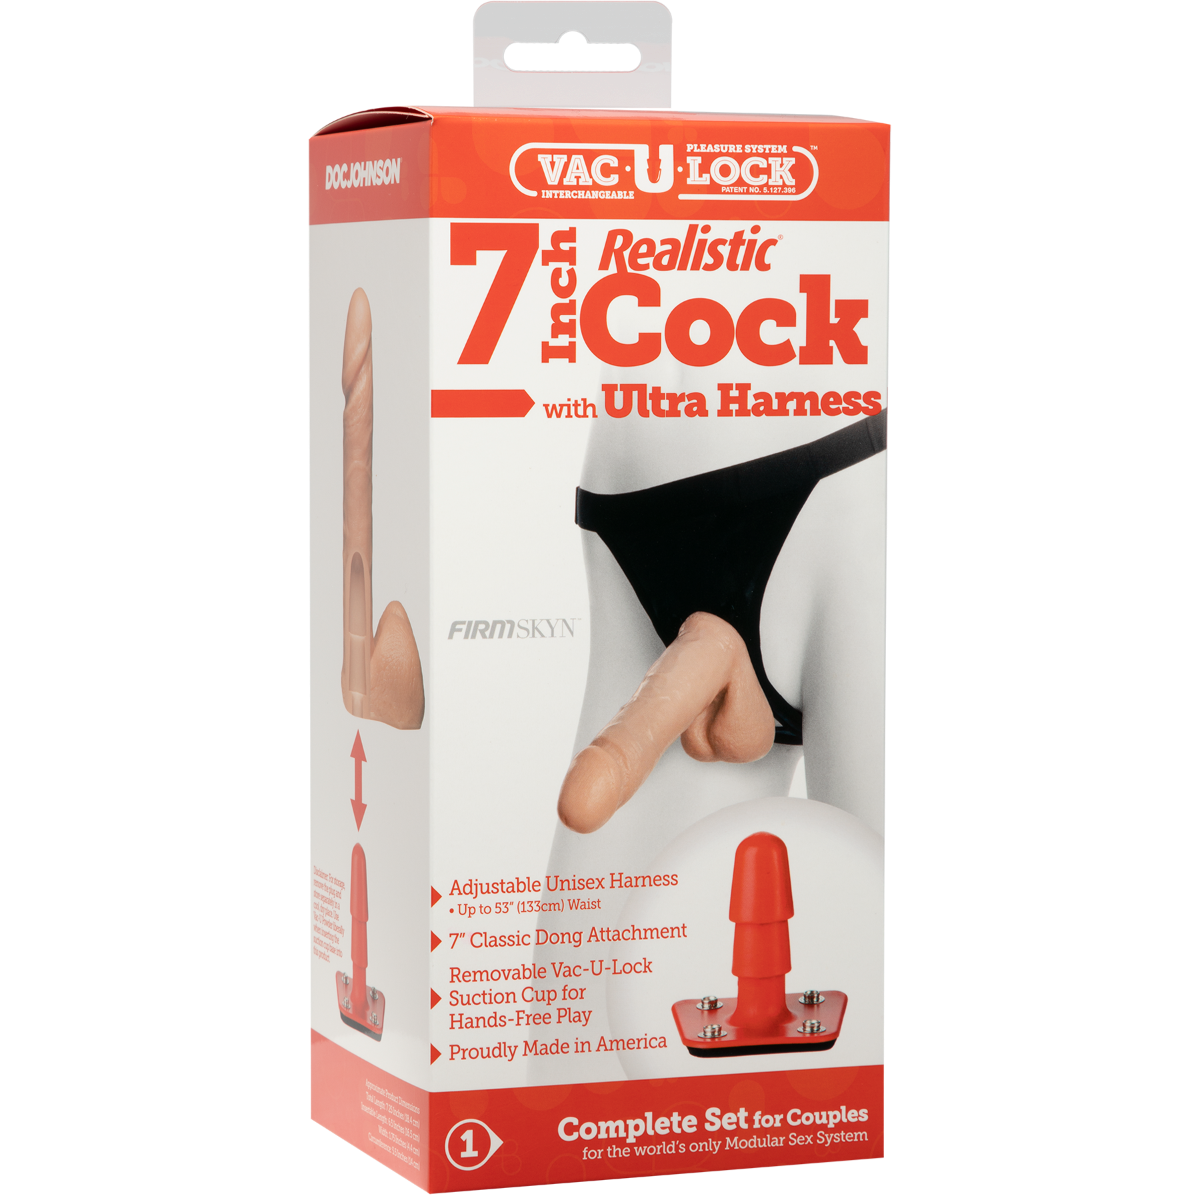 Strap Ons Vac-U-Lock Realistic Cock with Ultra Harness White 6in   